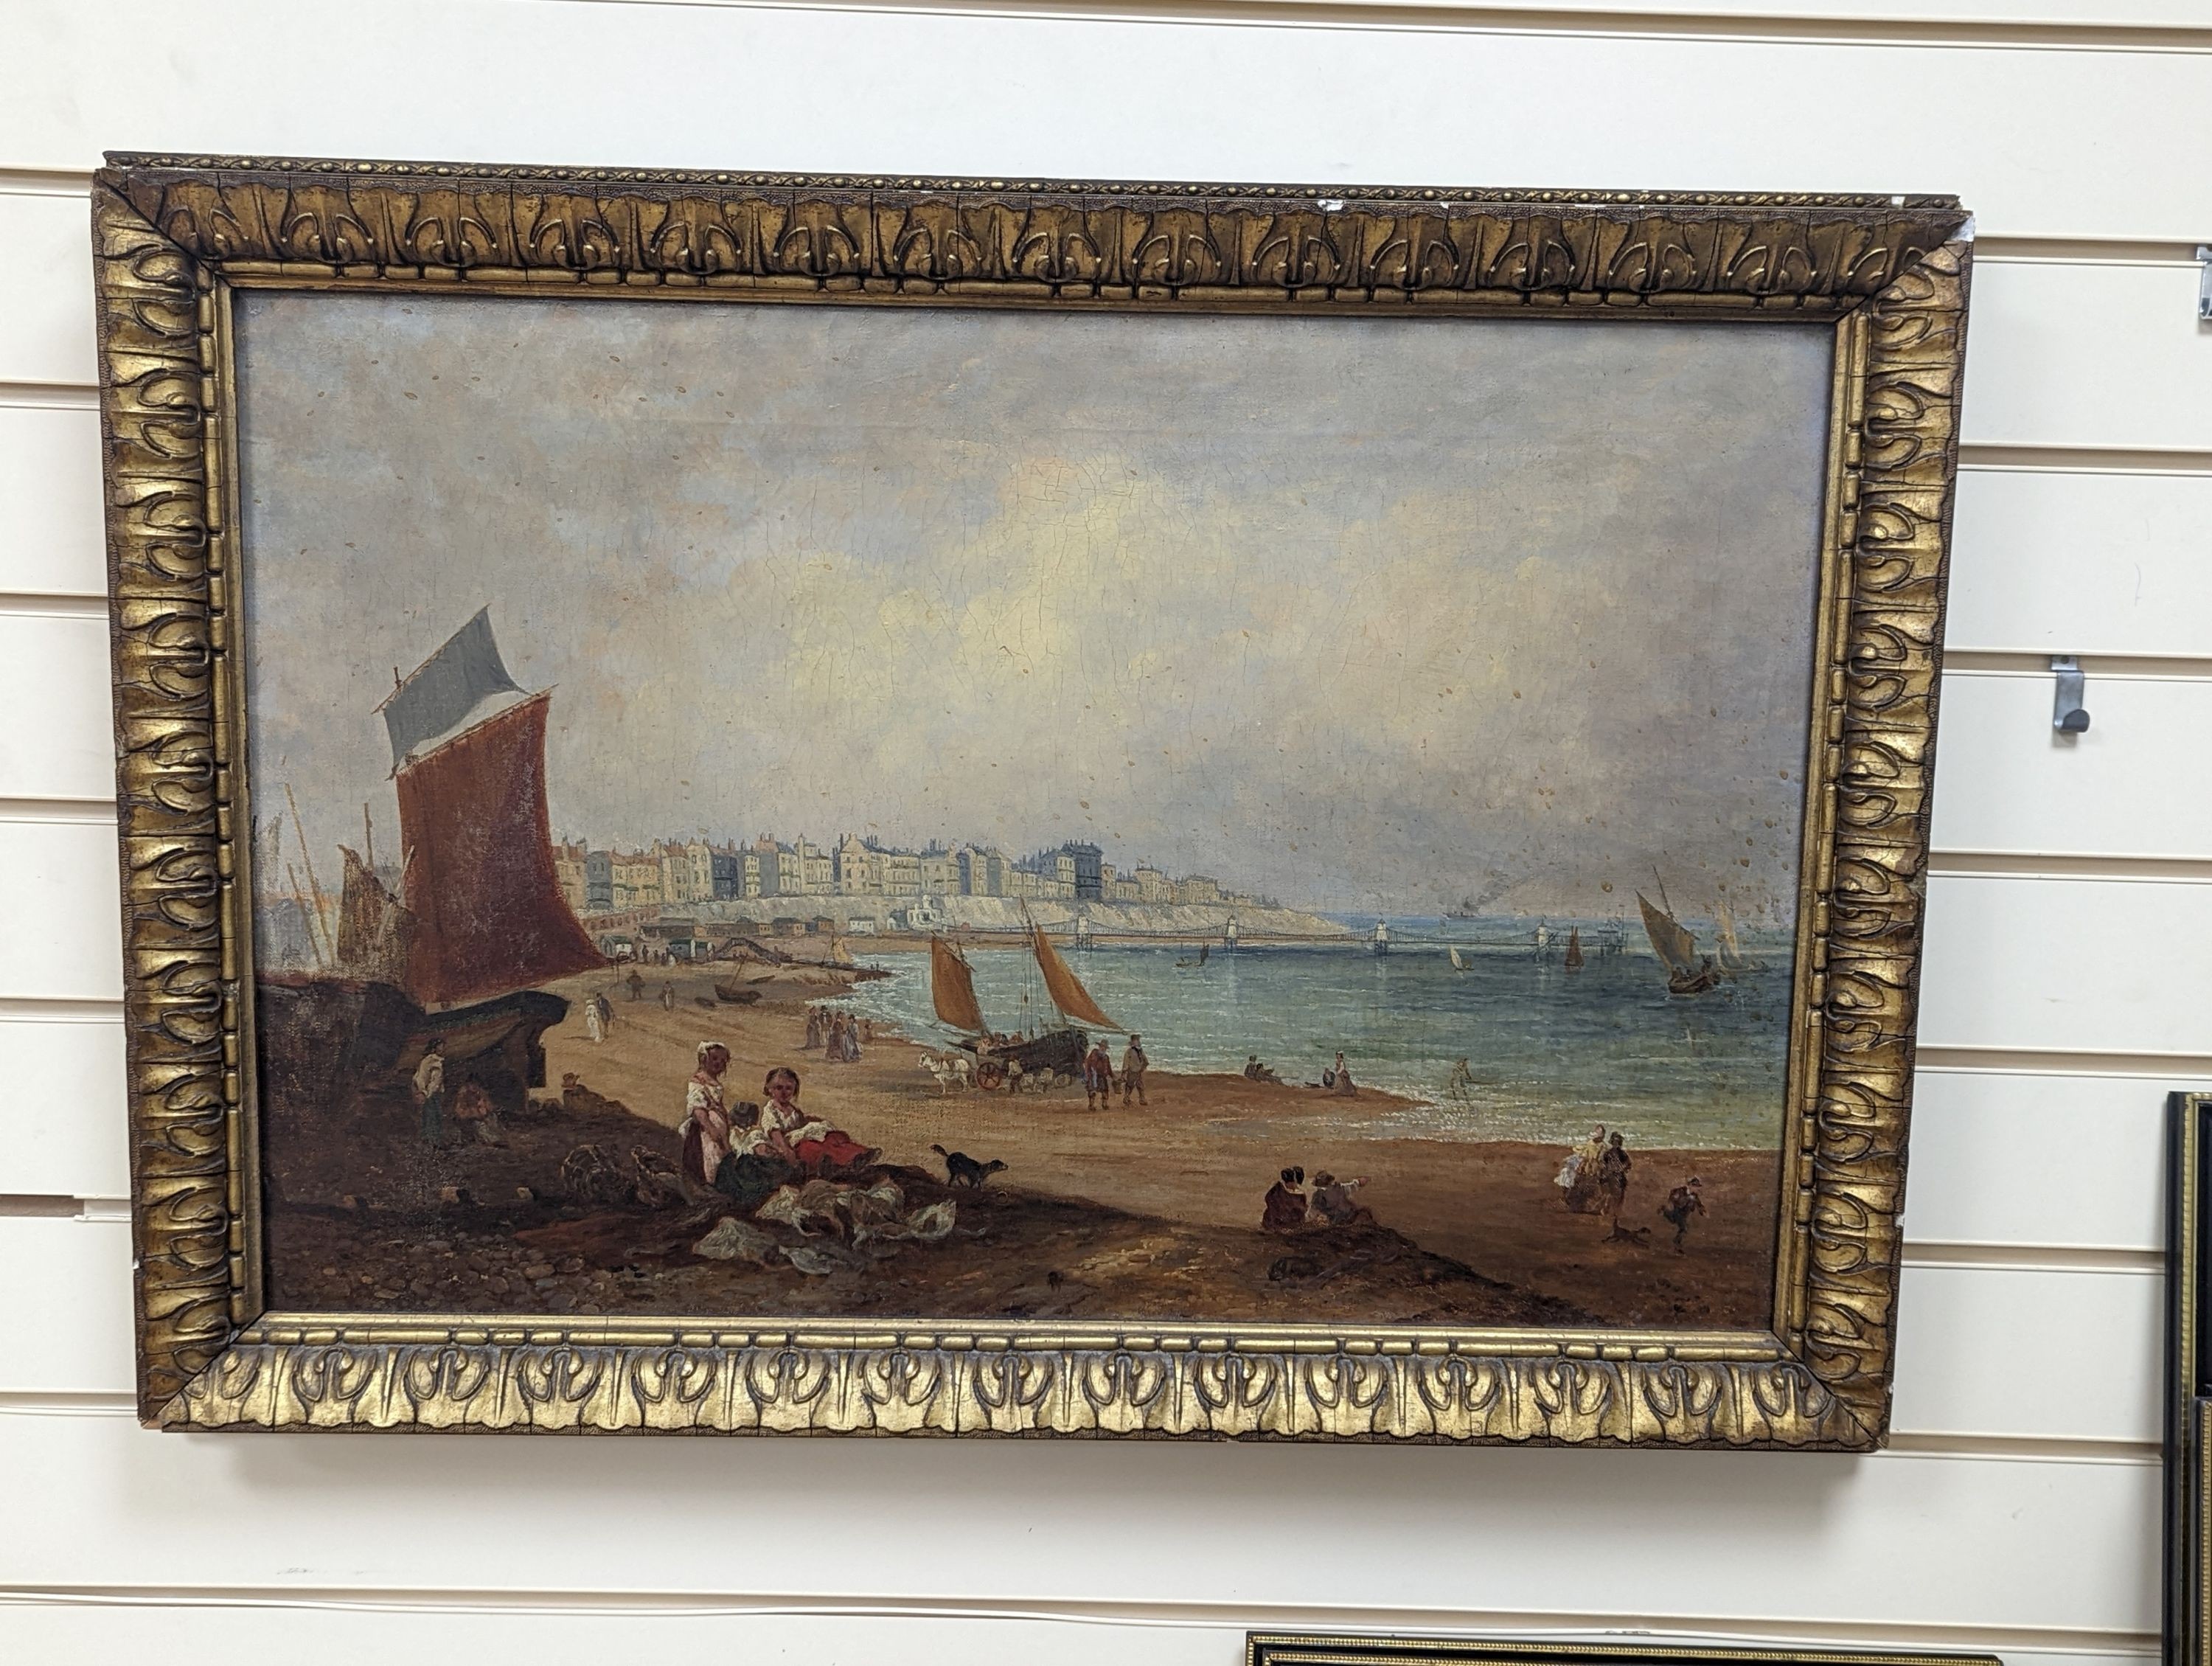 19th century English School, oil on canvas, View along Brighton seafront with the Chain Pier, 49 x 74cm